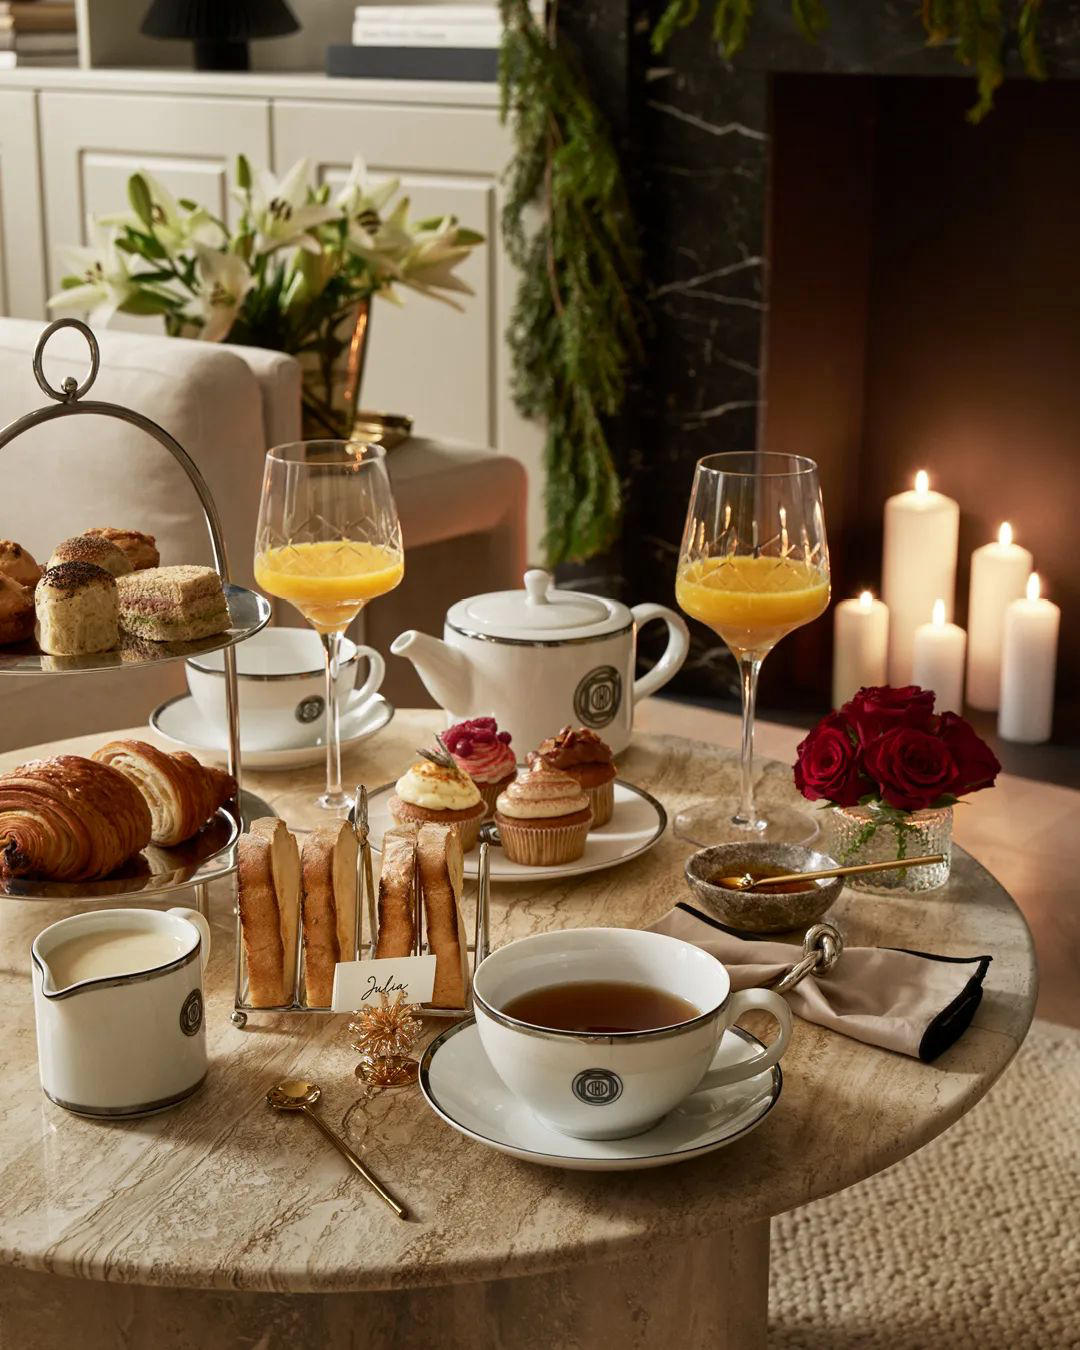 H&M HOME - Add a hotel vibe to your home with this elegant tea set